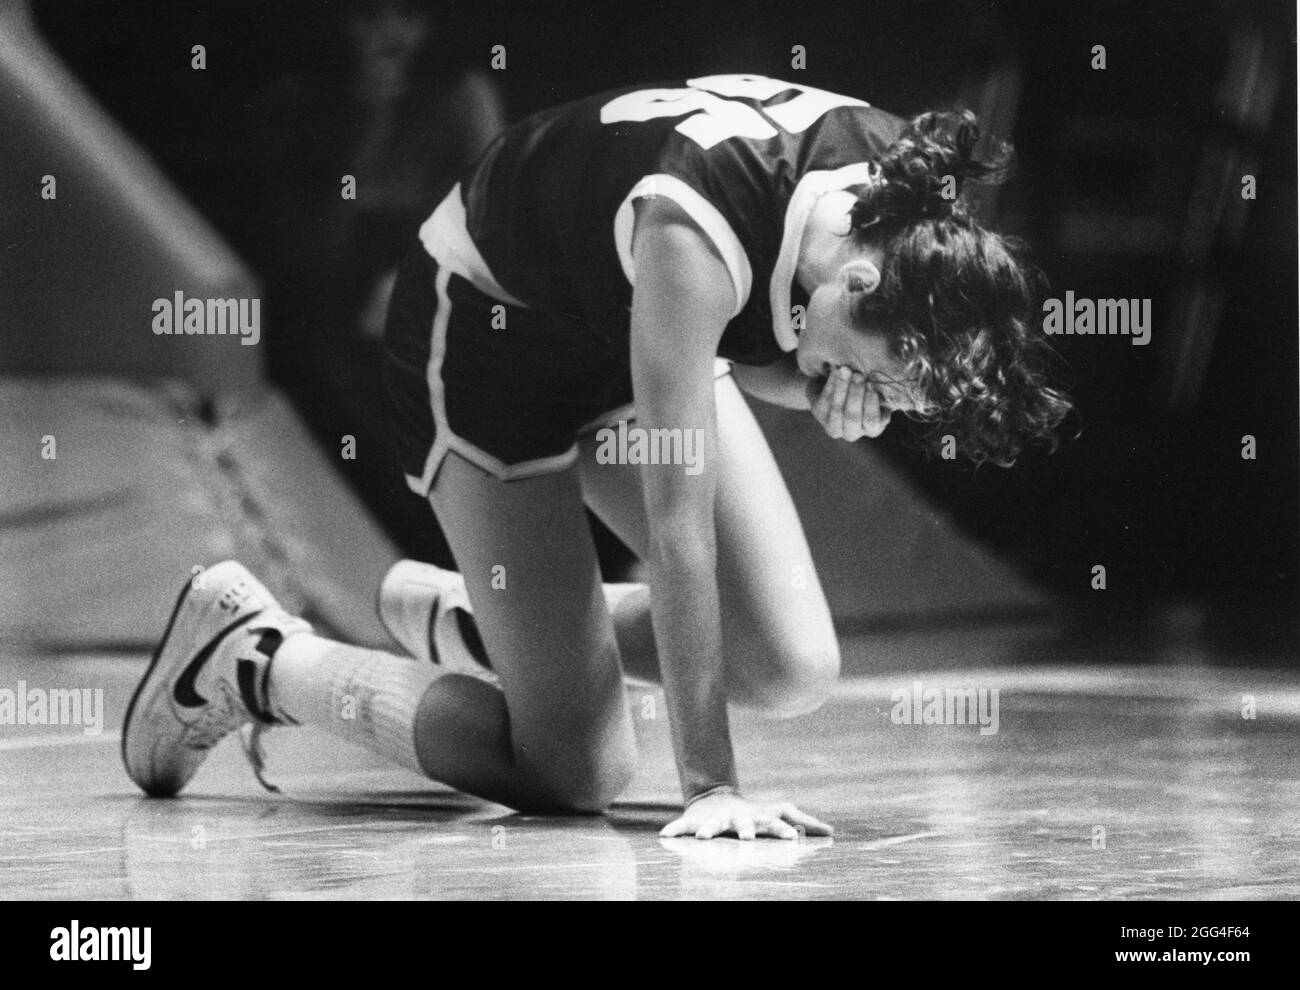 Austin Texas USA, circa 1988: Sports Injury: Teen girl reacts after being hit in the face during a high school basketball game. ©Bob Daemmrich Stock Photo